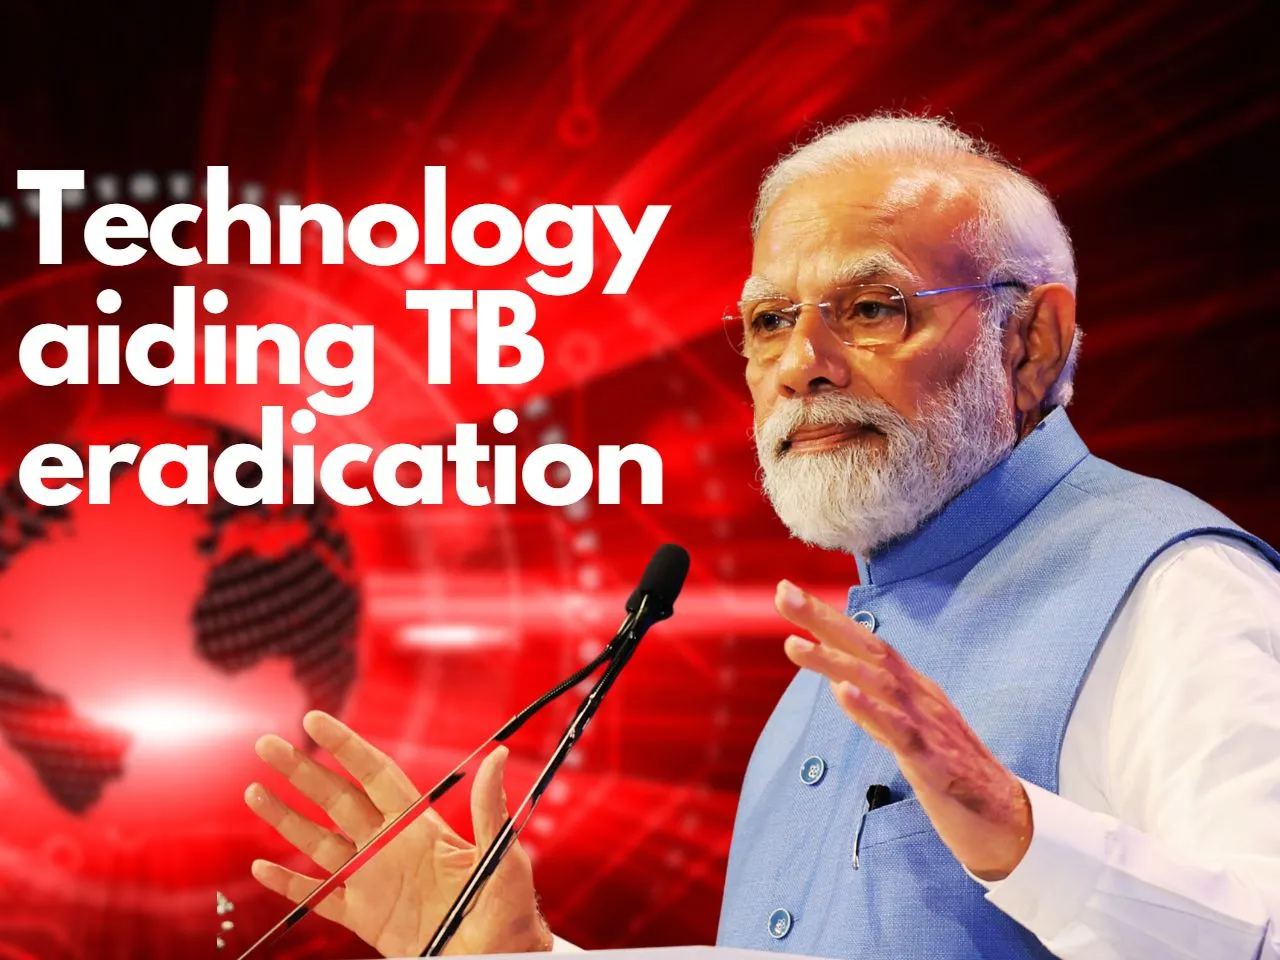 PM Modi Highlights Role Of Technology To Tackle TB